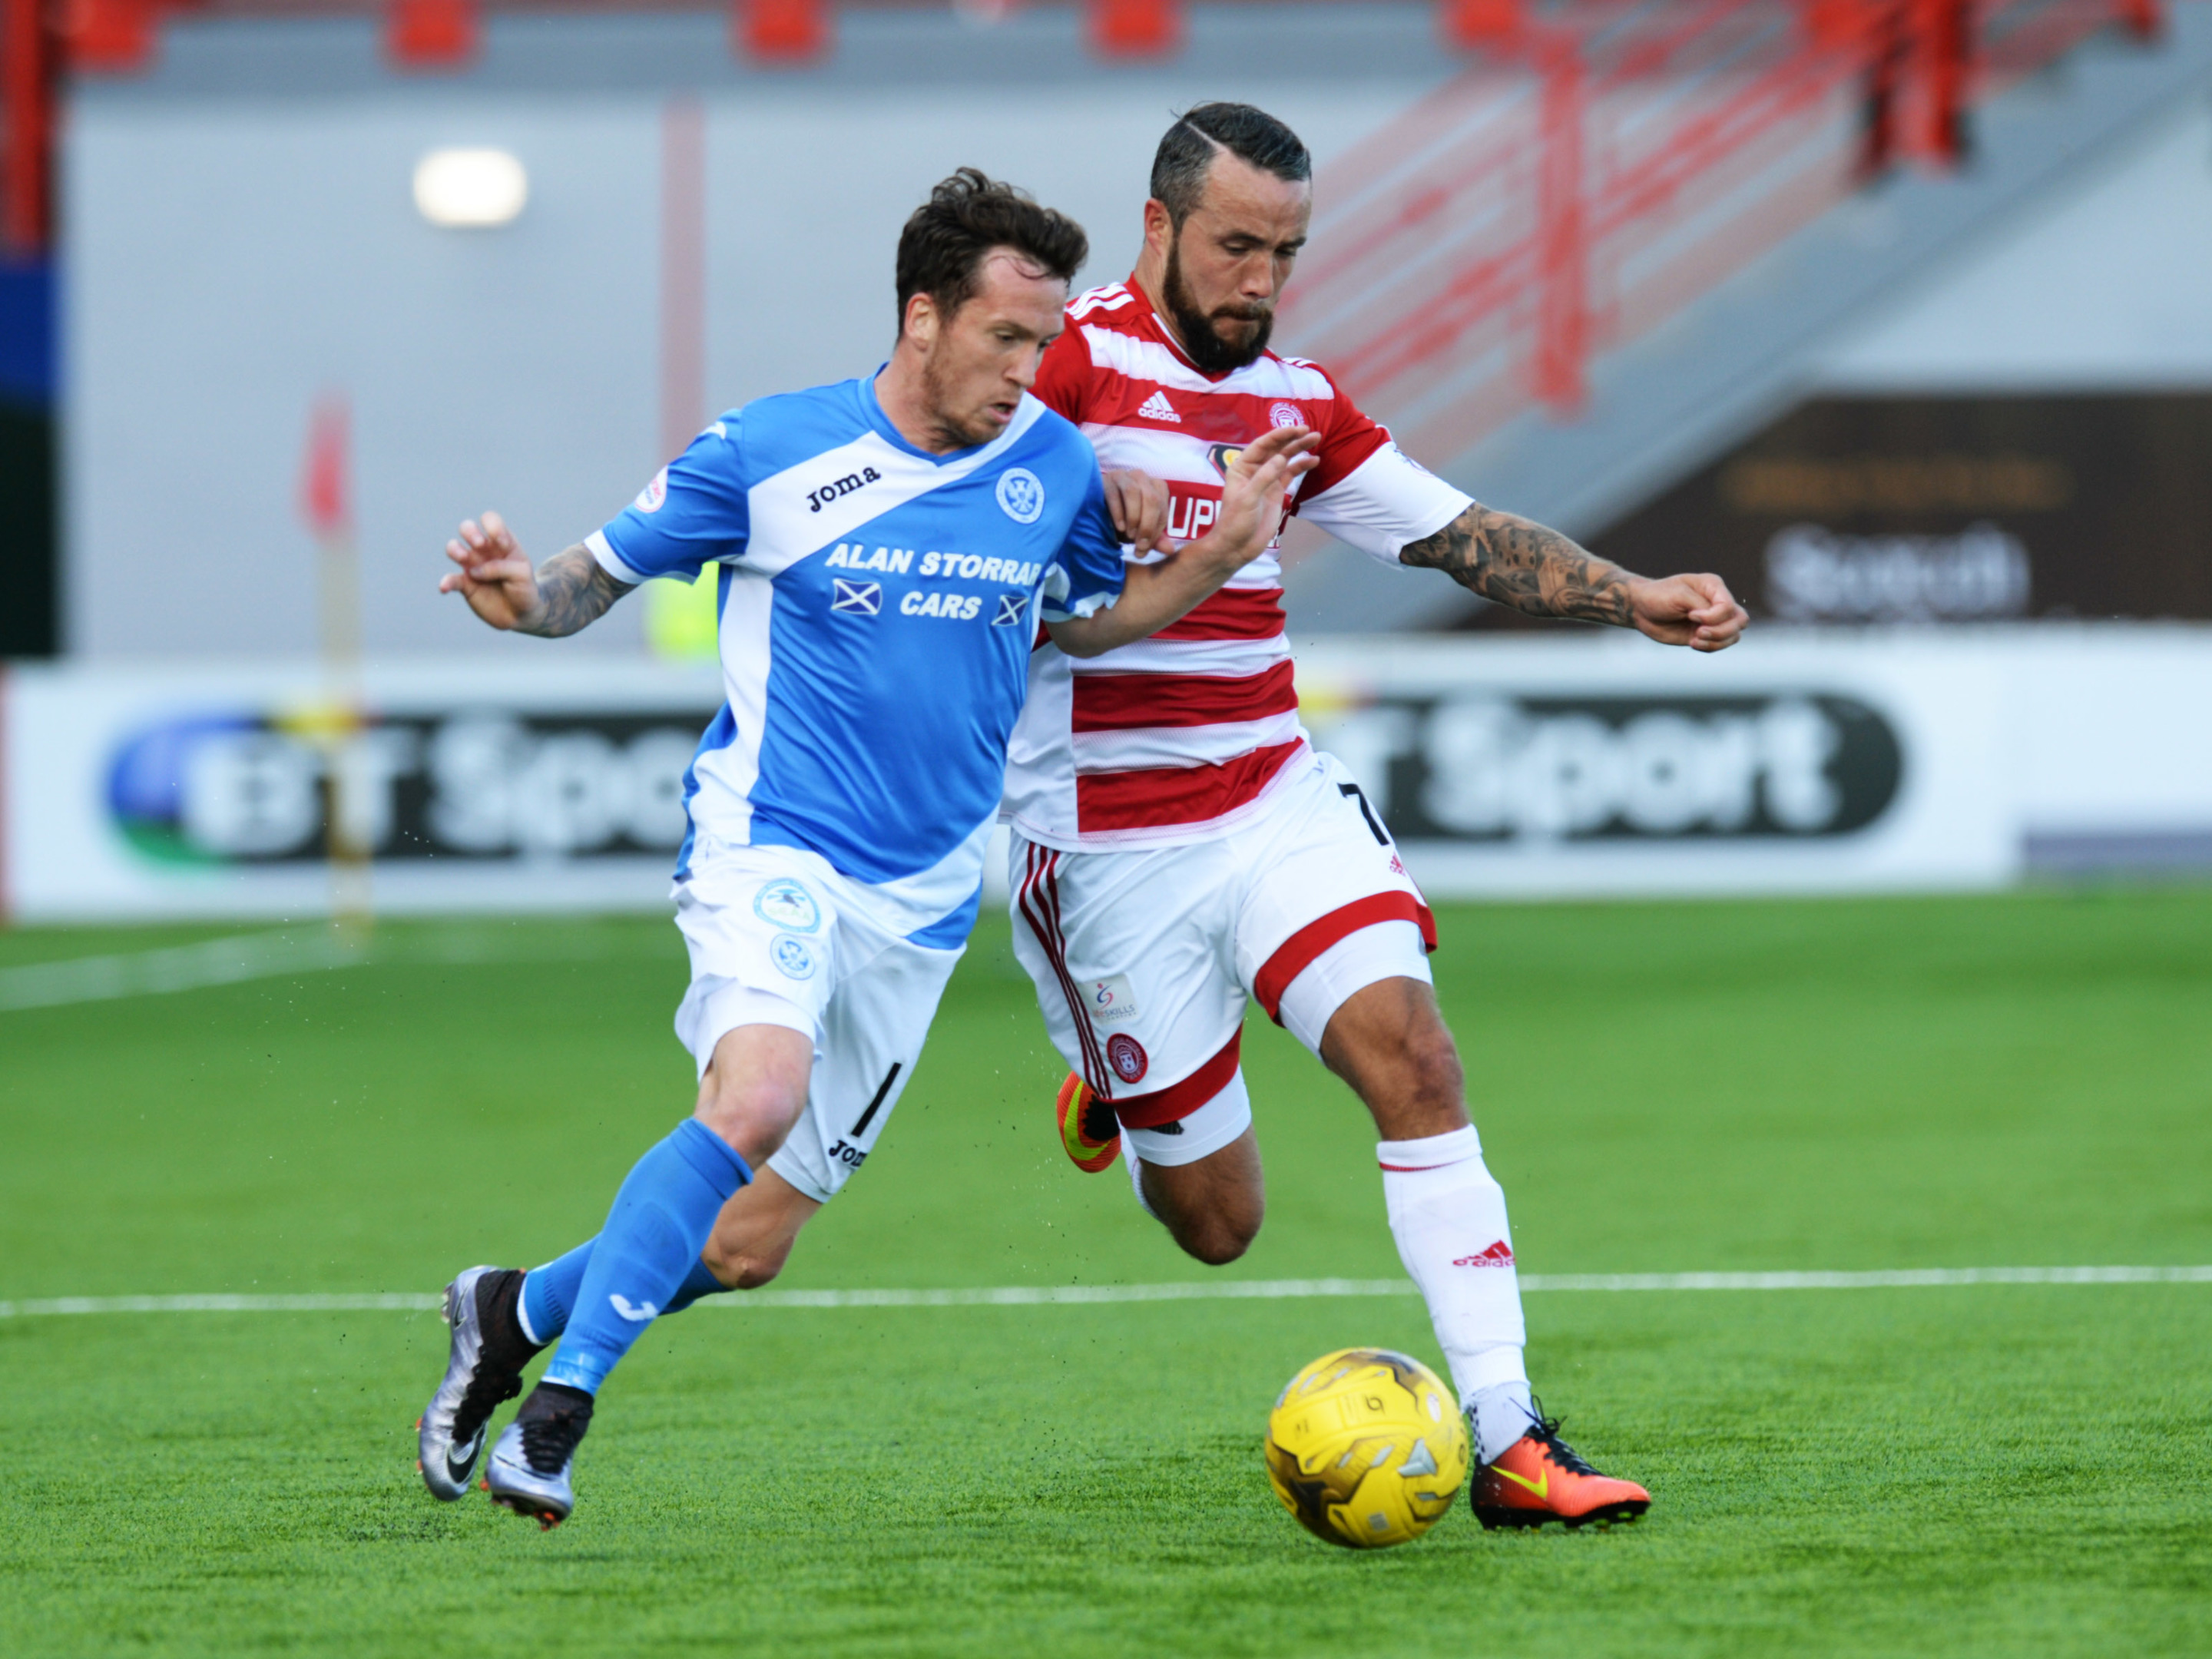 St Johnstone's Danny Swanson and Hamilton's Dougie Imrie battle for the ball.